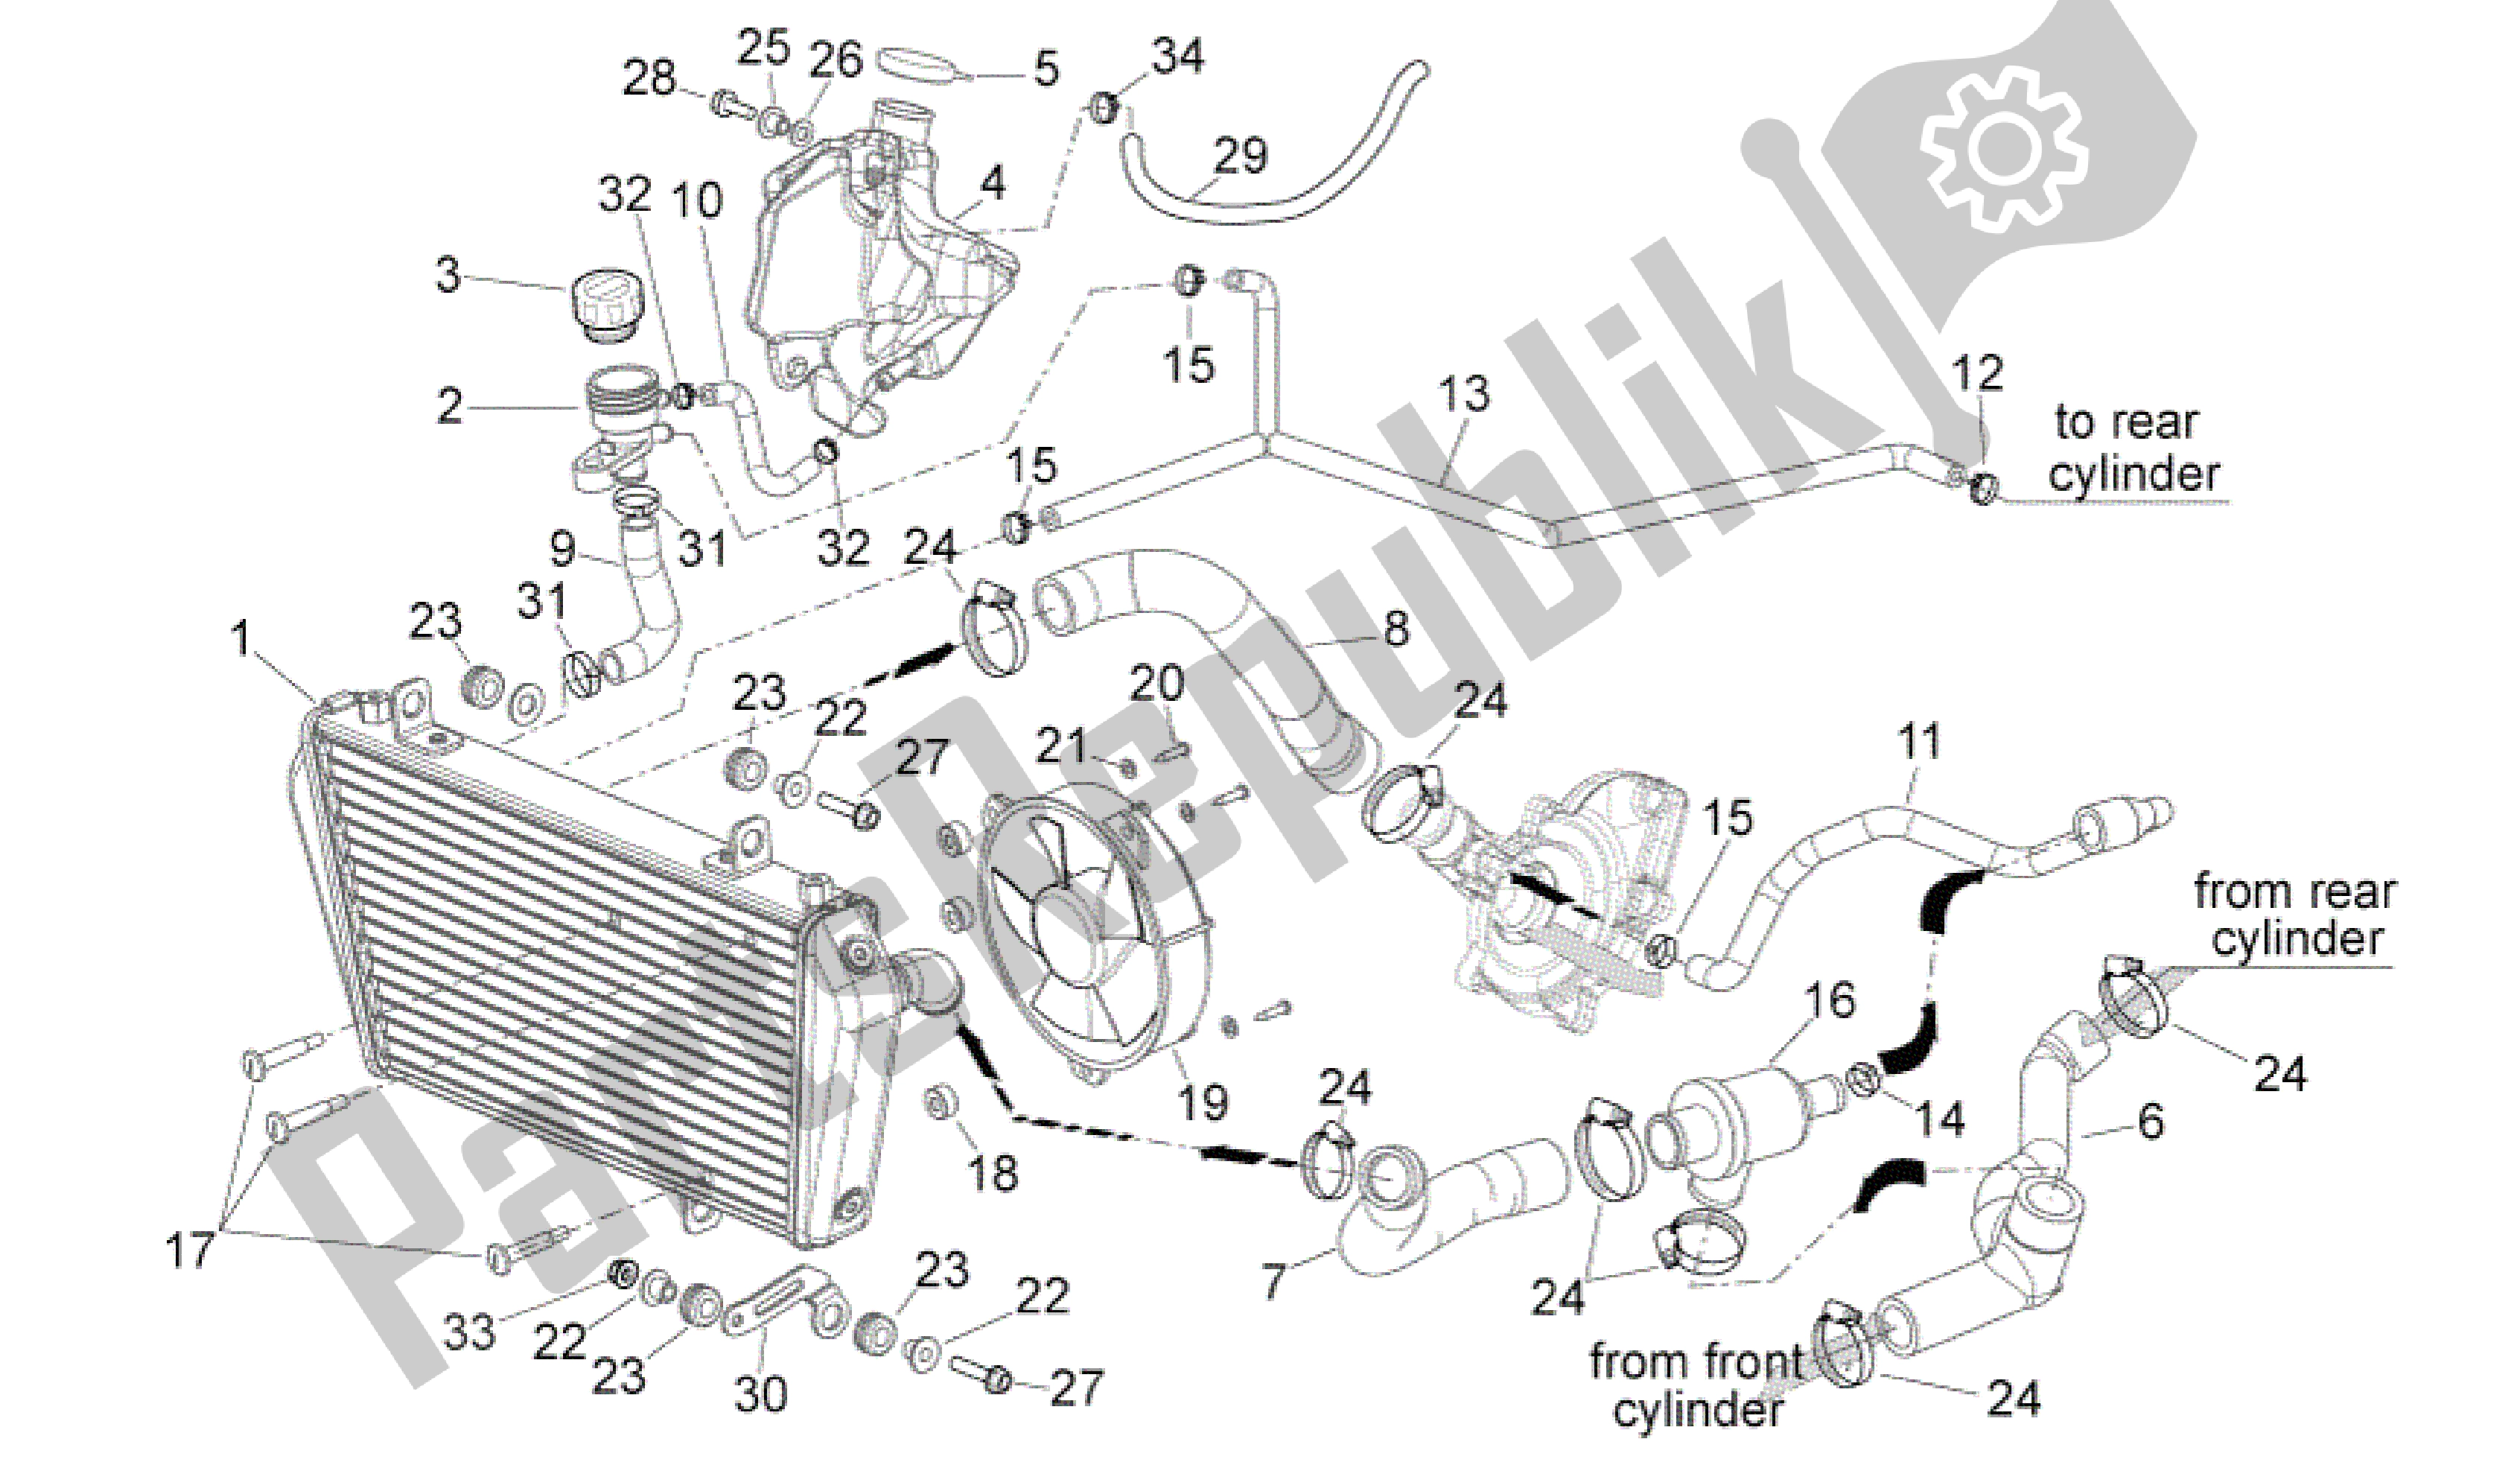 All parts for the Cooling System of the Aprilia Shiver 750 2011 - 2013